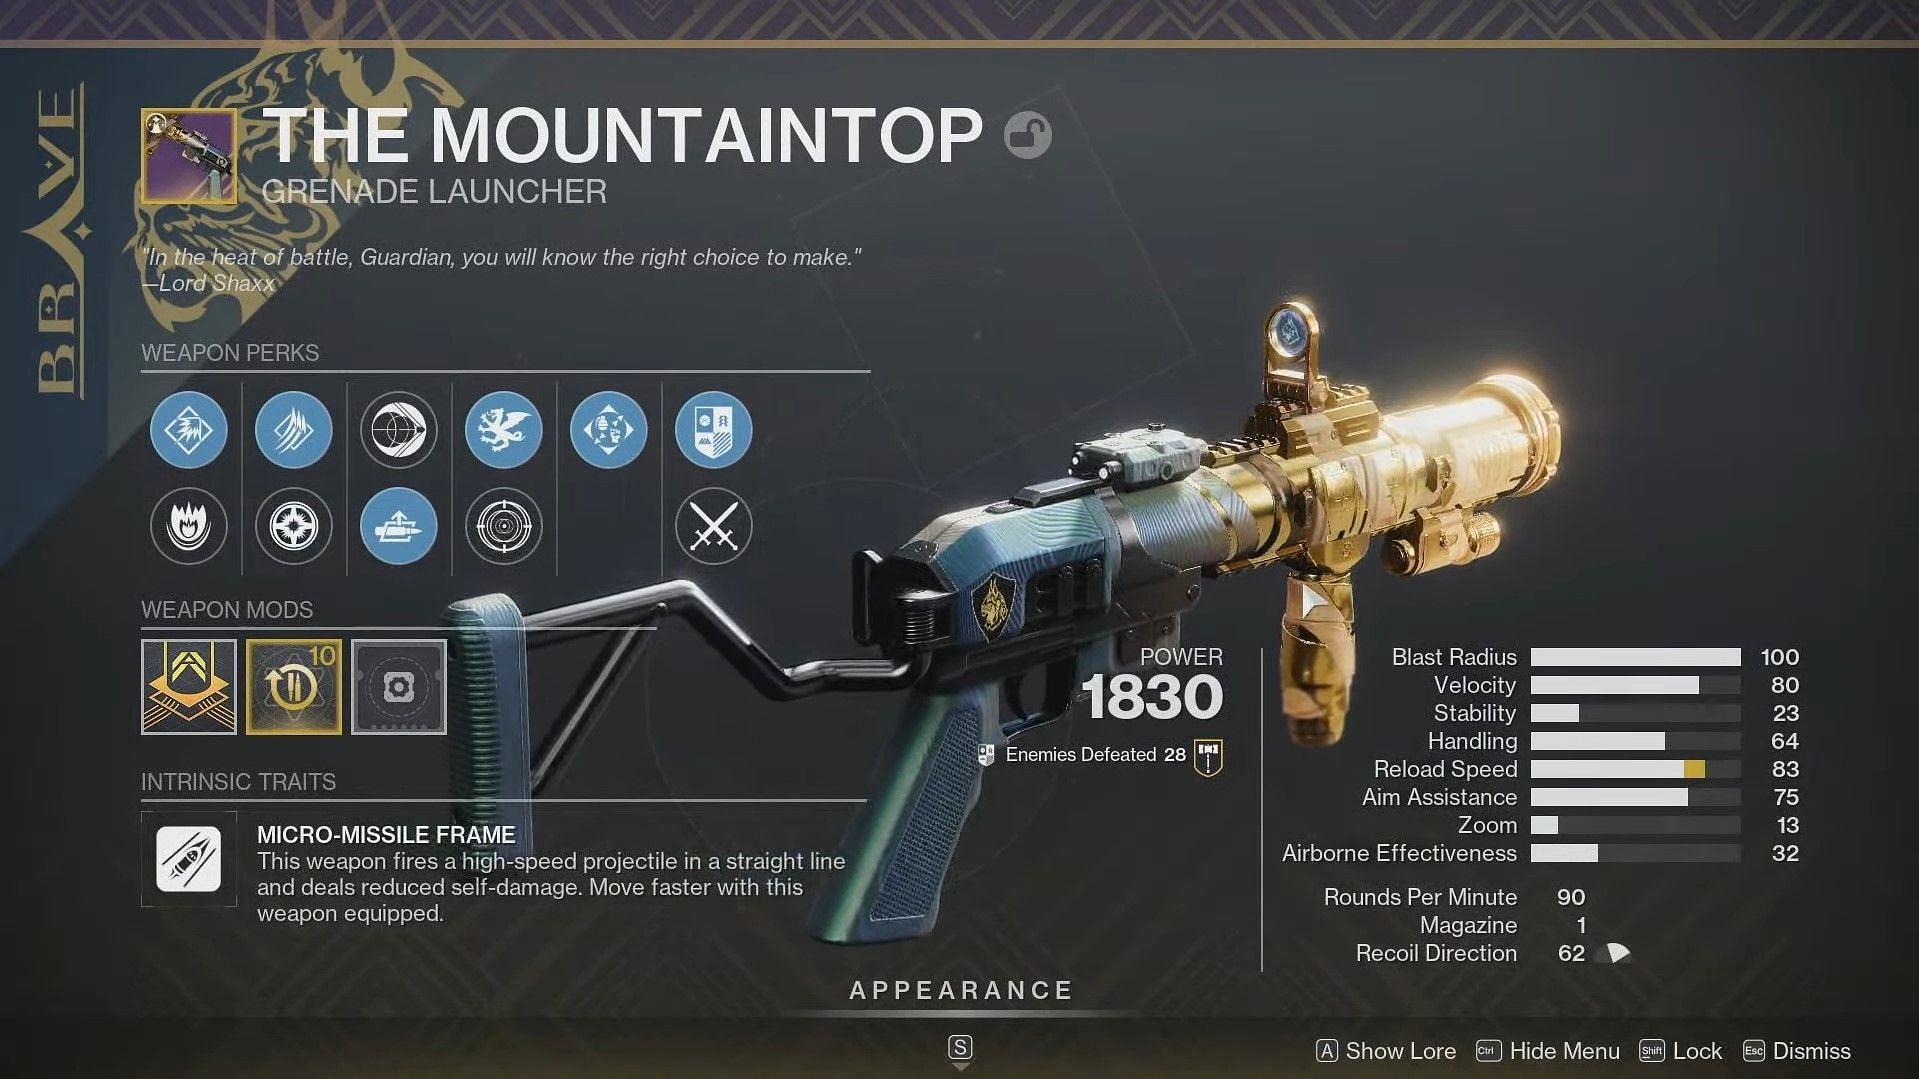 The Mountaintop in Destiny 2 (Image via Bungie)